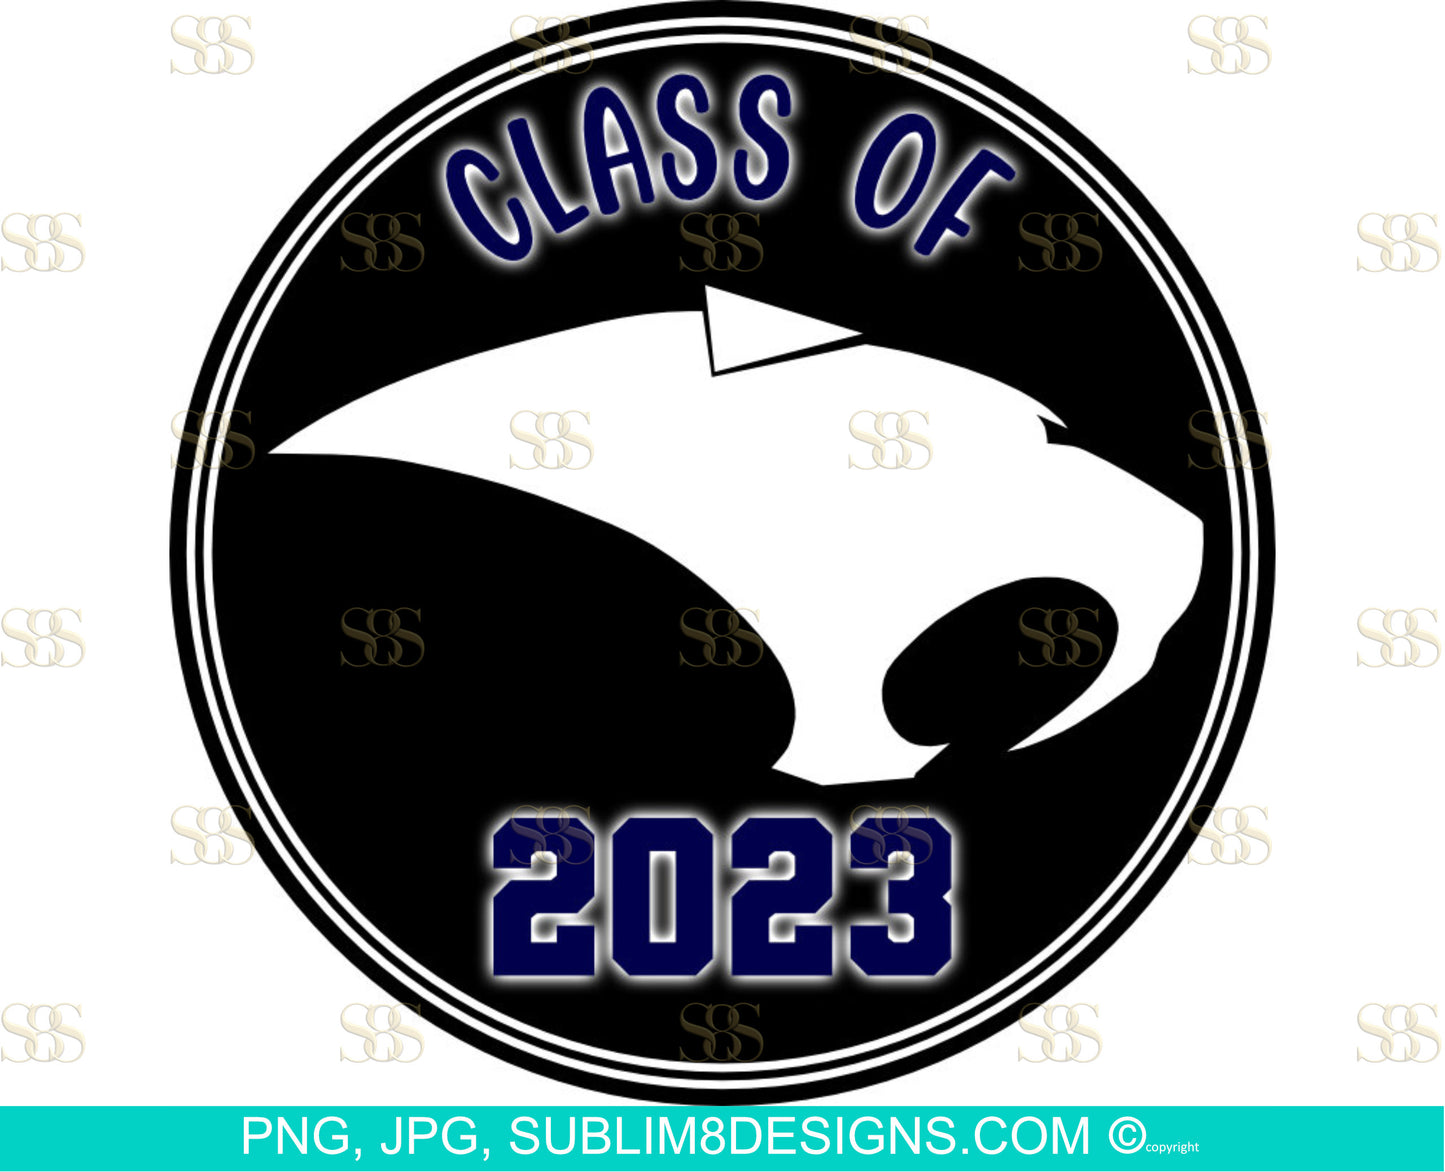 Class Of 2023 Decal